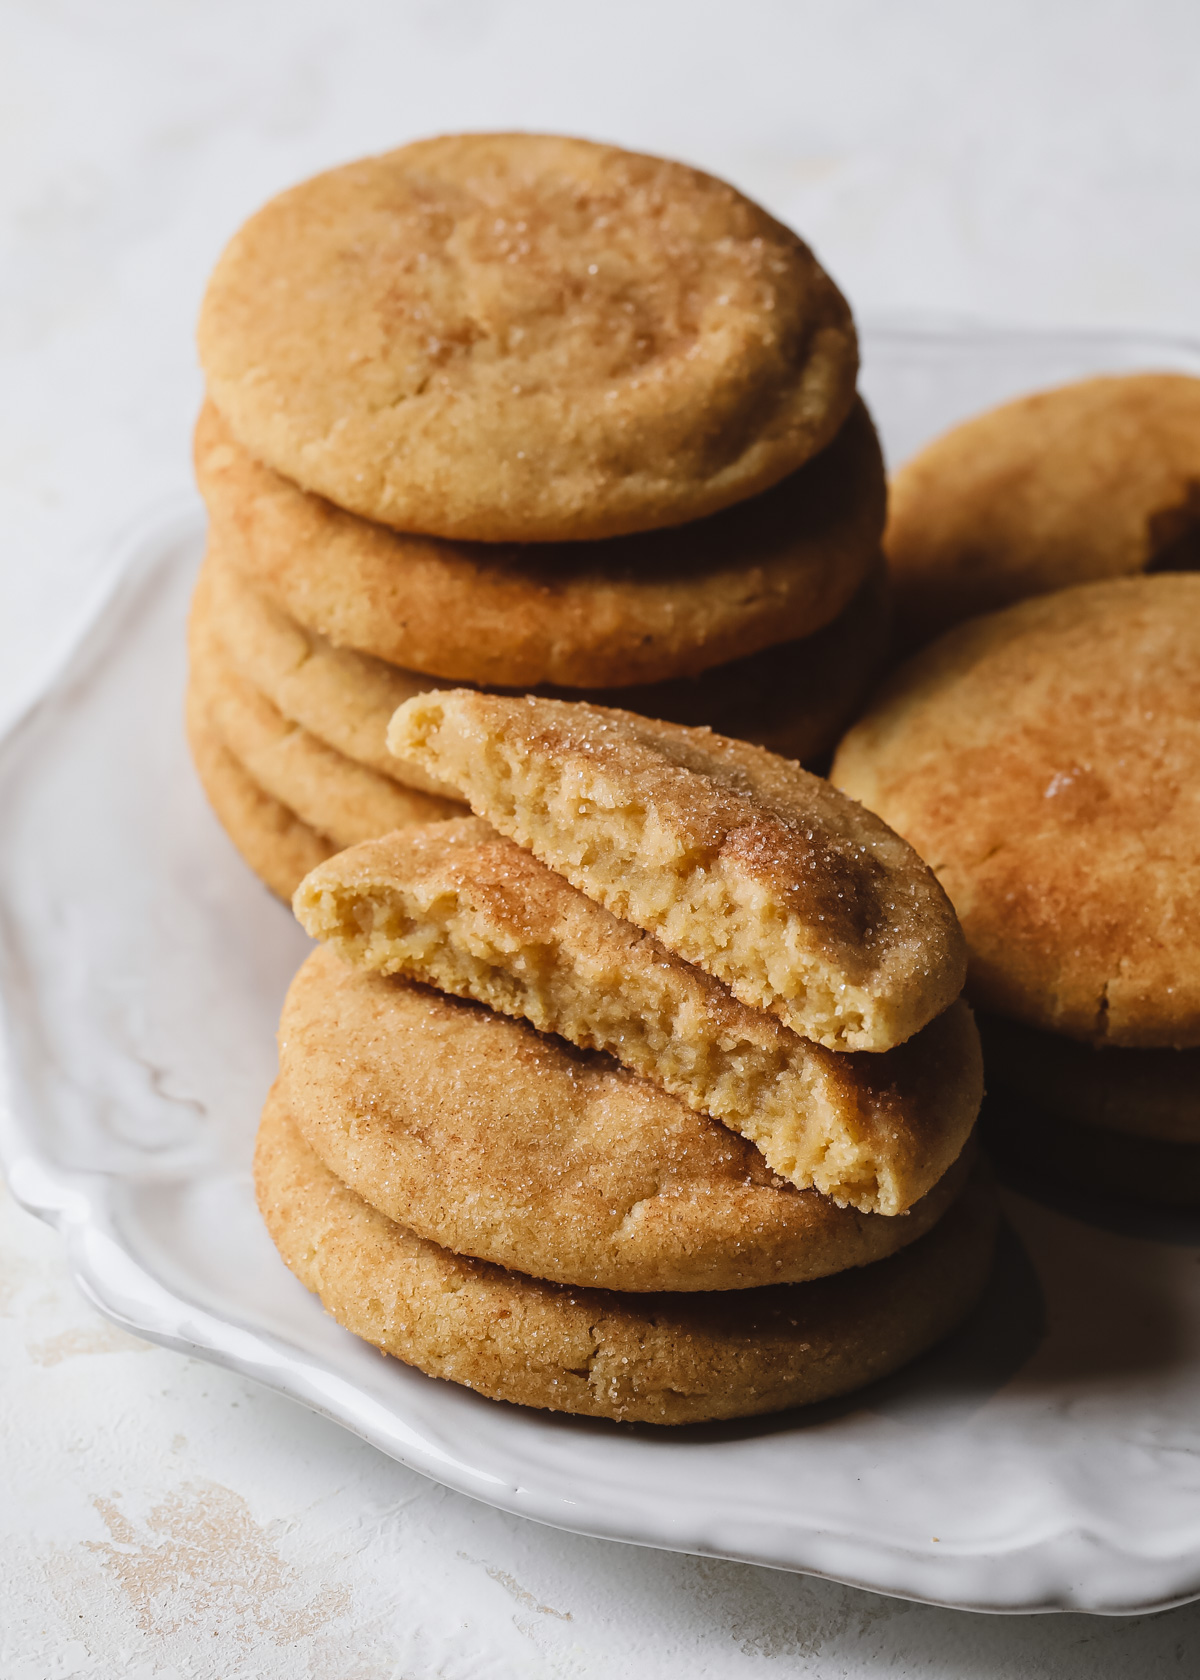 Stacks of brown butter snickerdoodles on a white plate